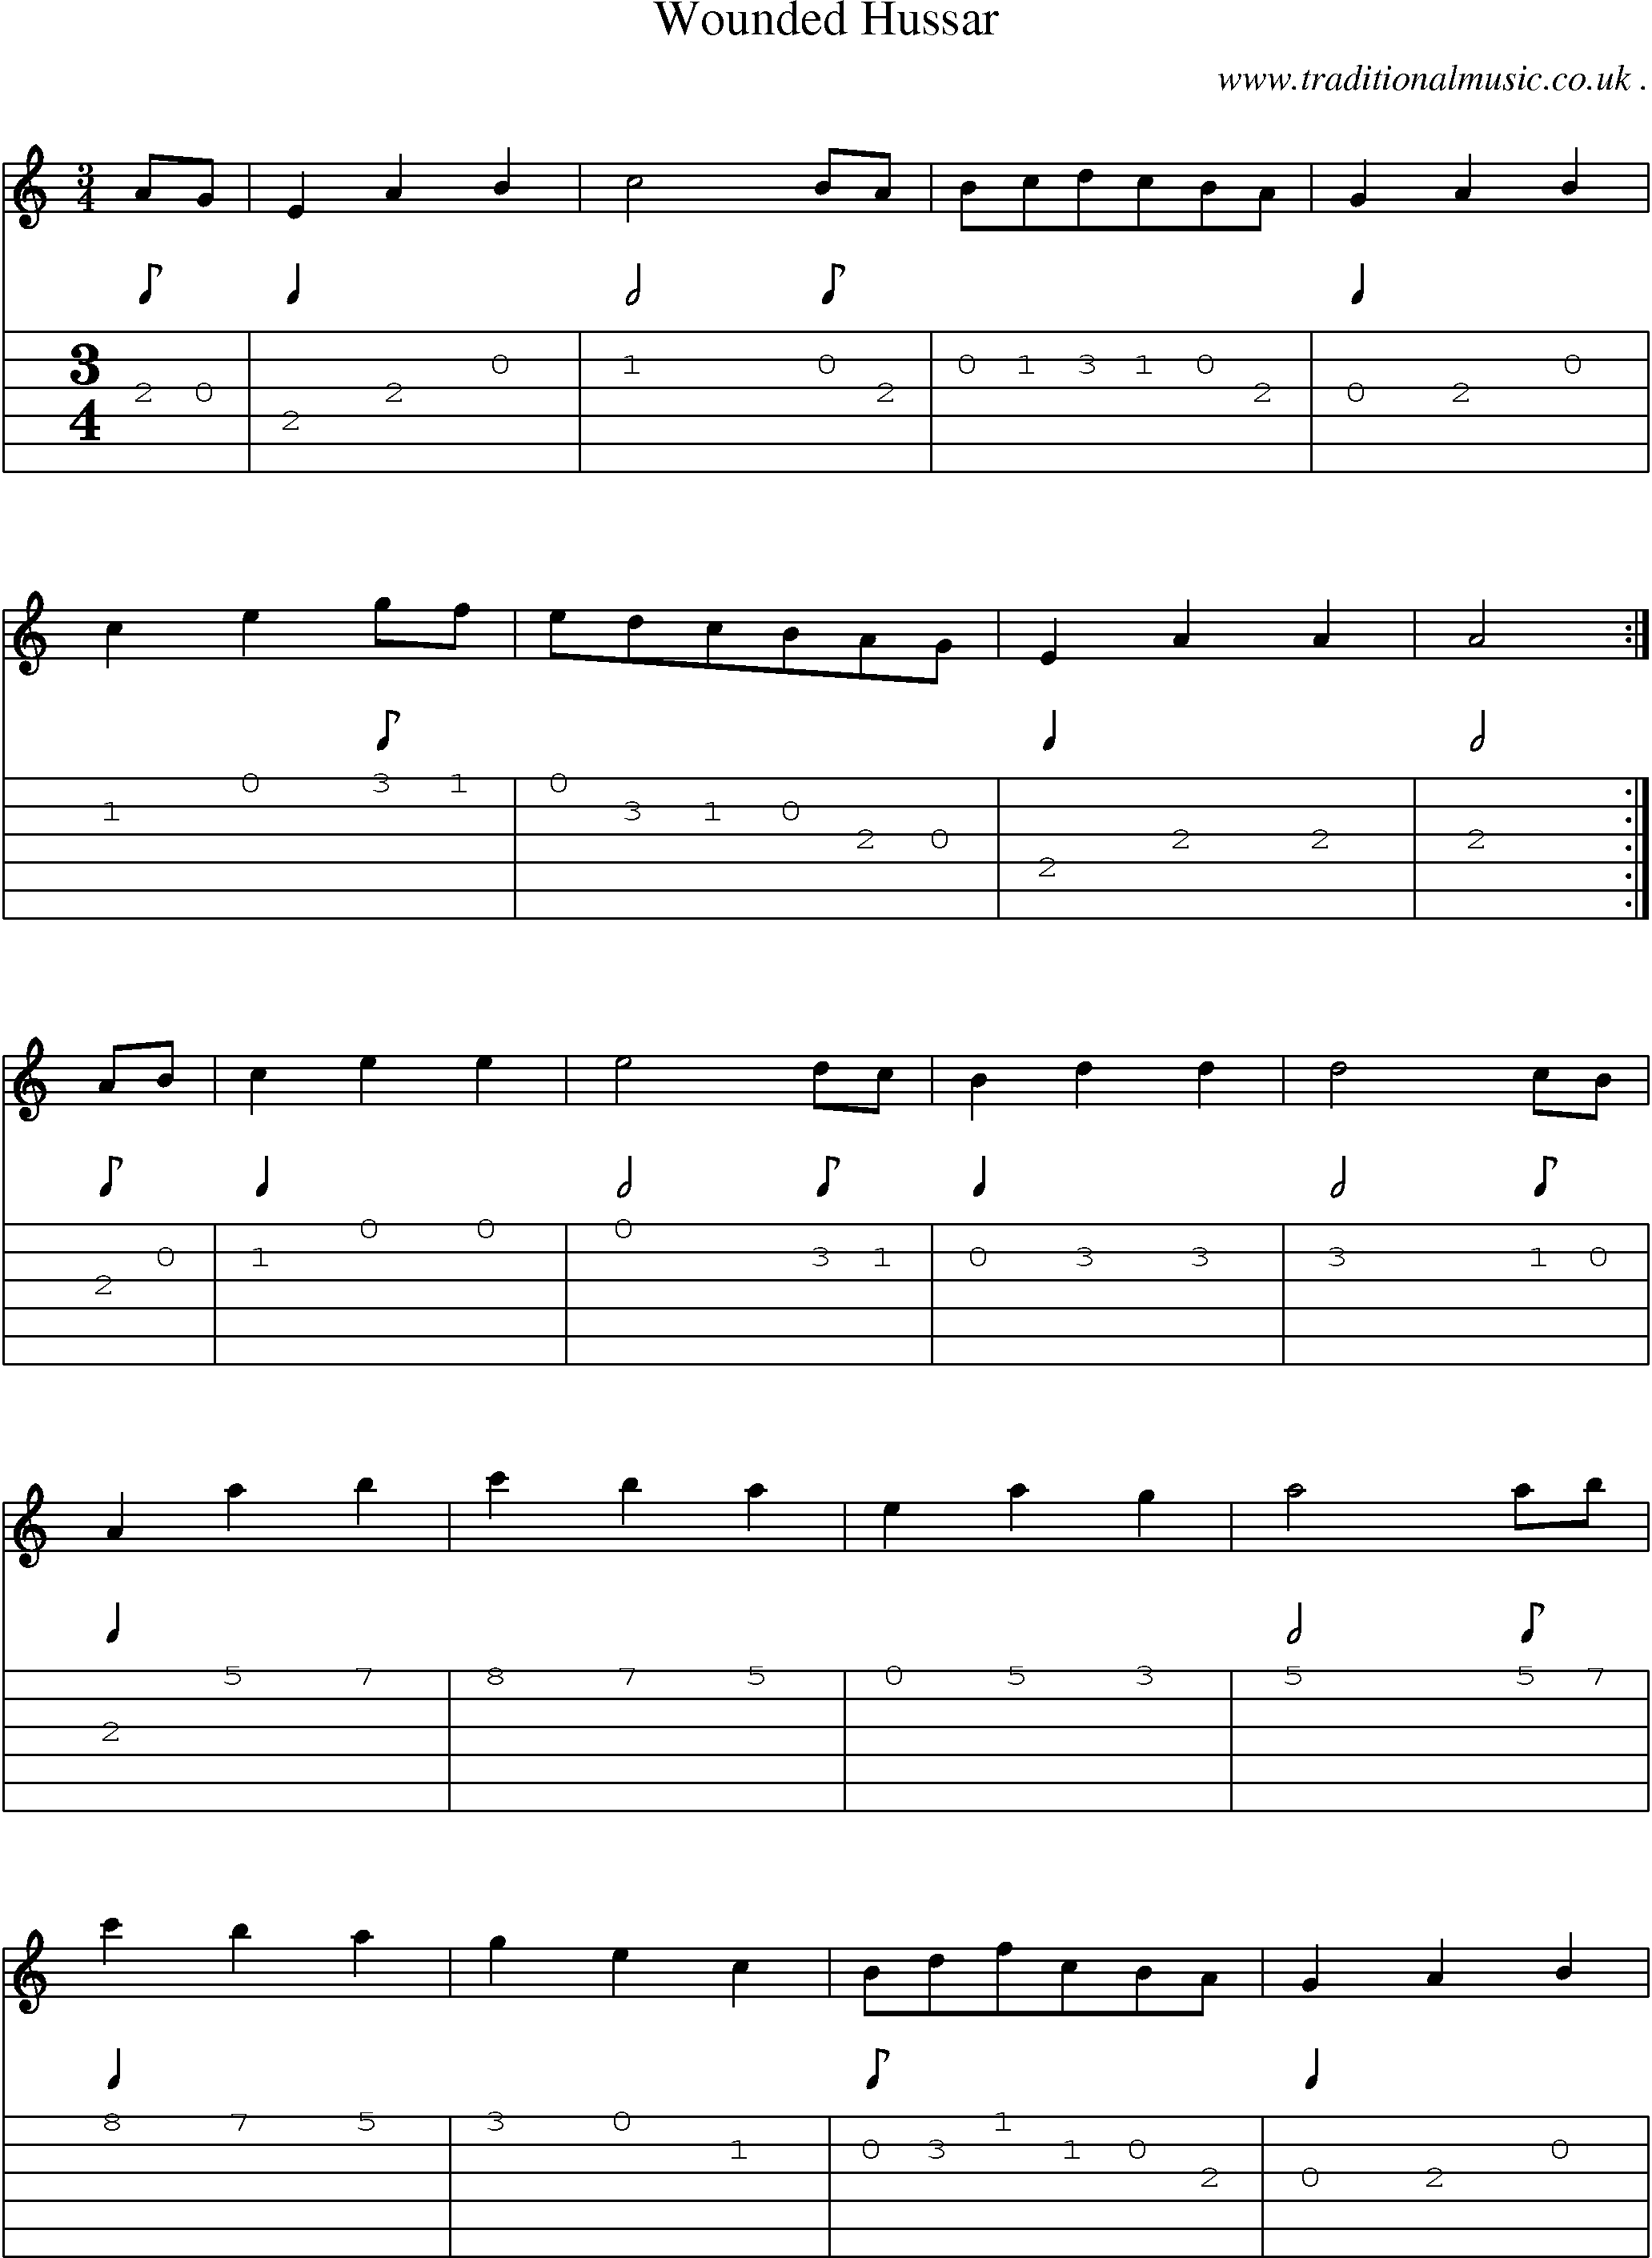 Sheet-Music and Guitar Tabs for Wounded Hussar